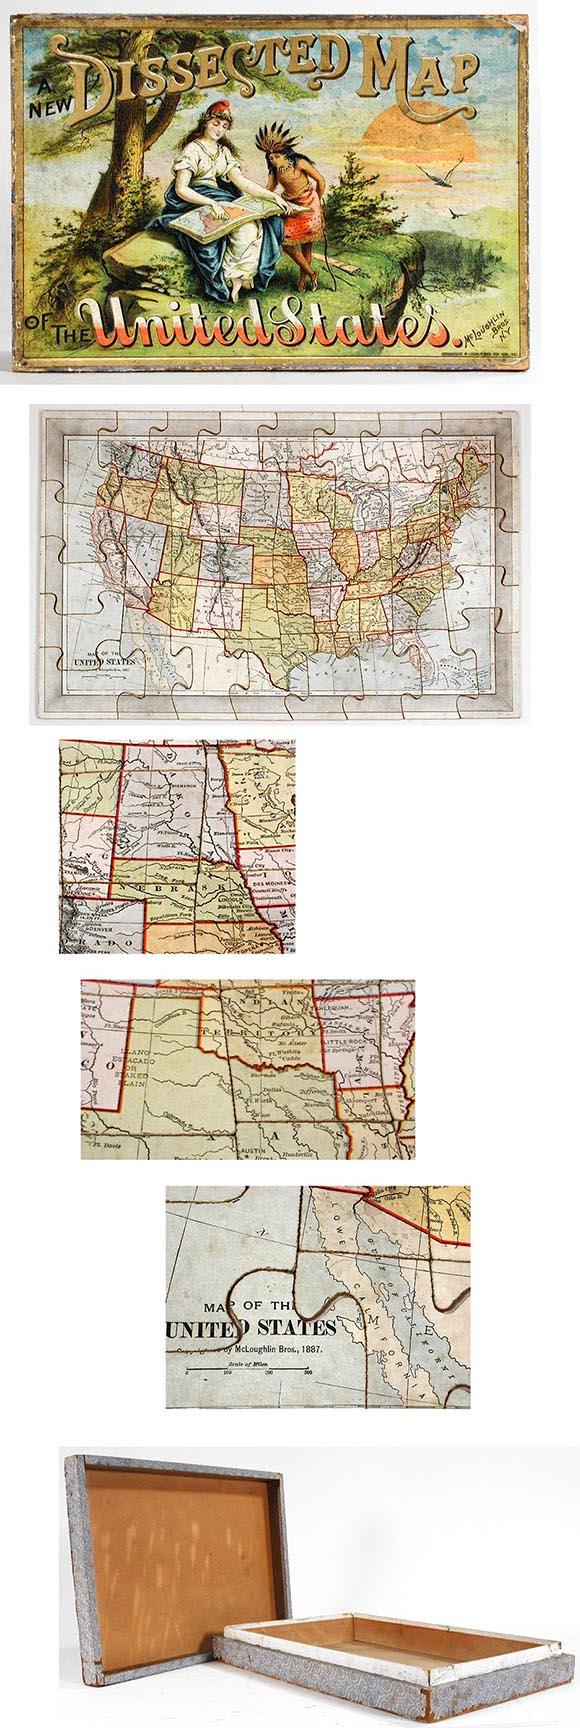 1887 McLoughlin Bros., New Dissected Map of the United States